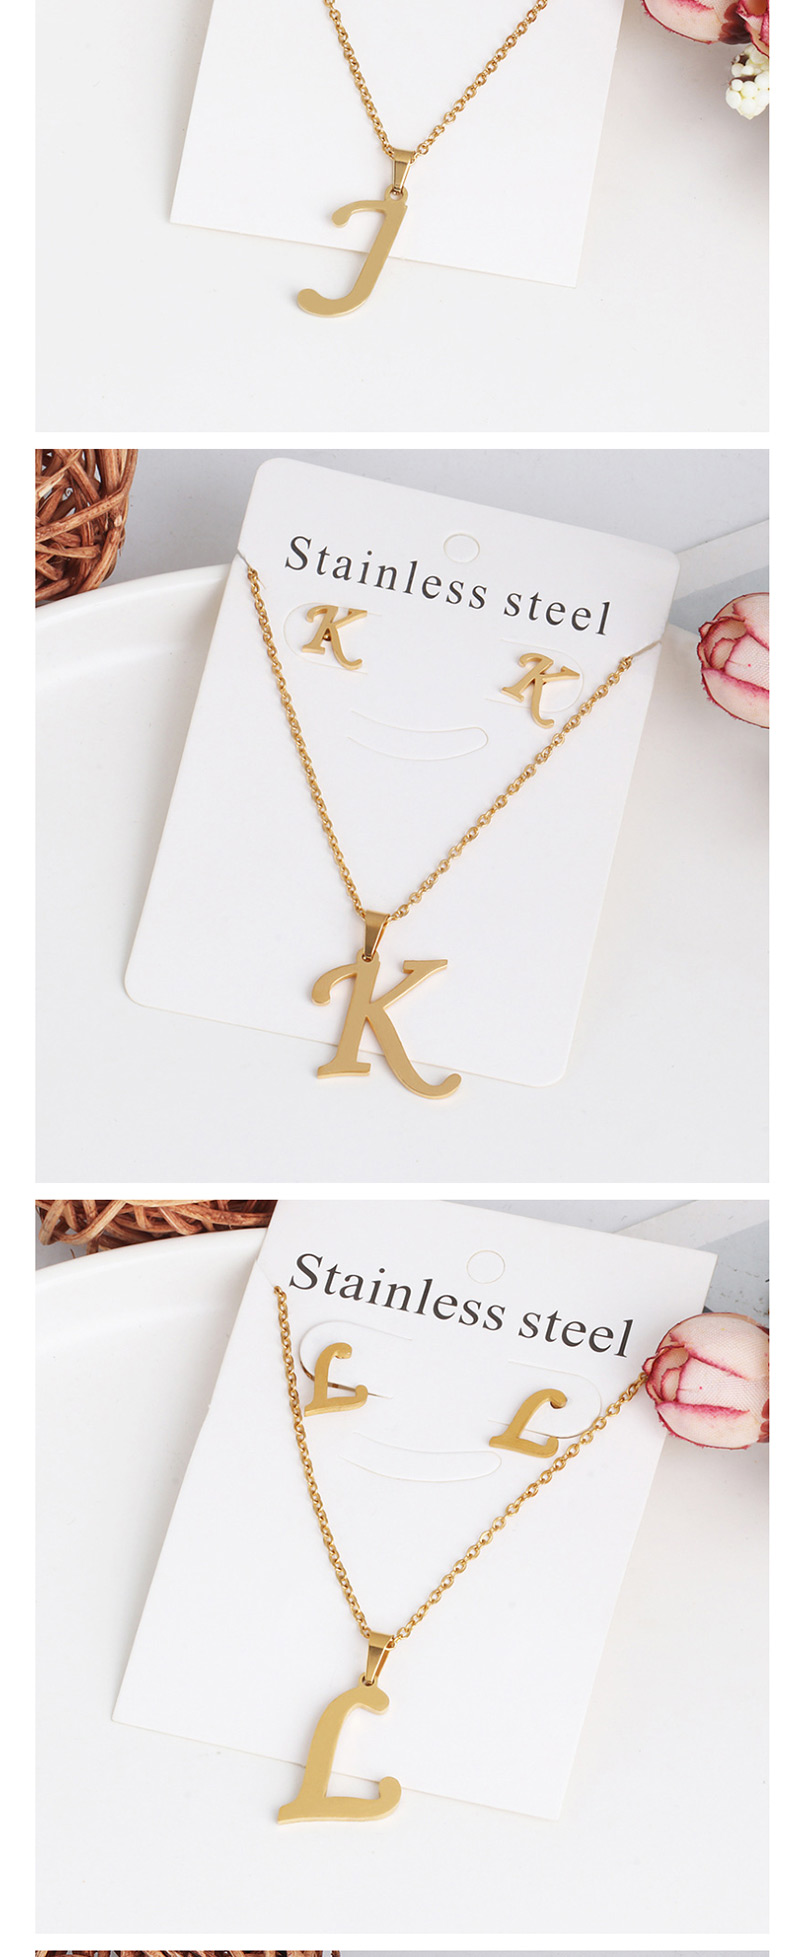 Fashion V Gold Stainless Steel Letter Necklace Earrings Two-piece,Jewelry Sets